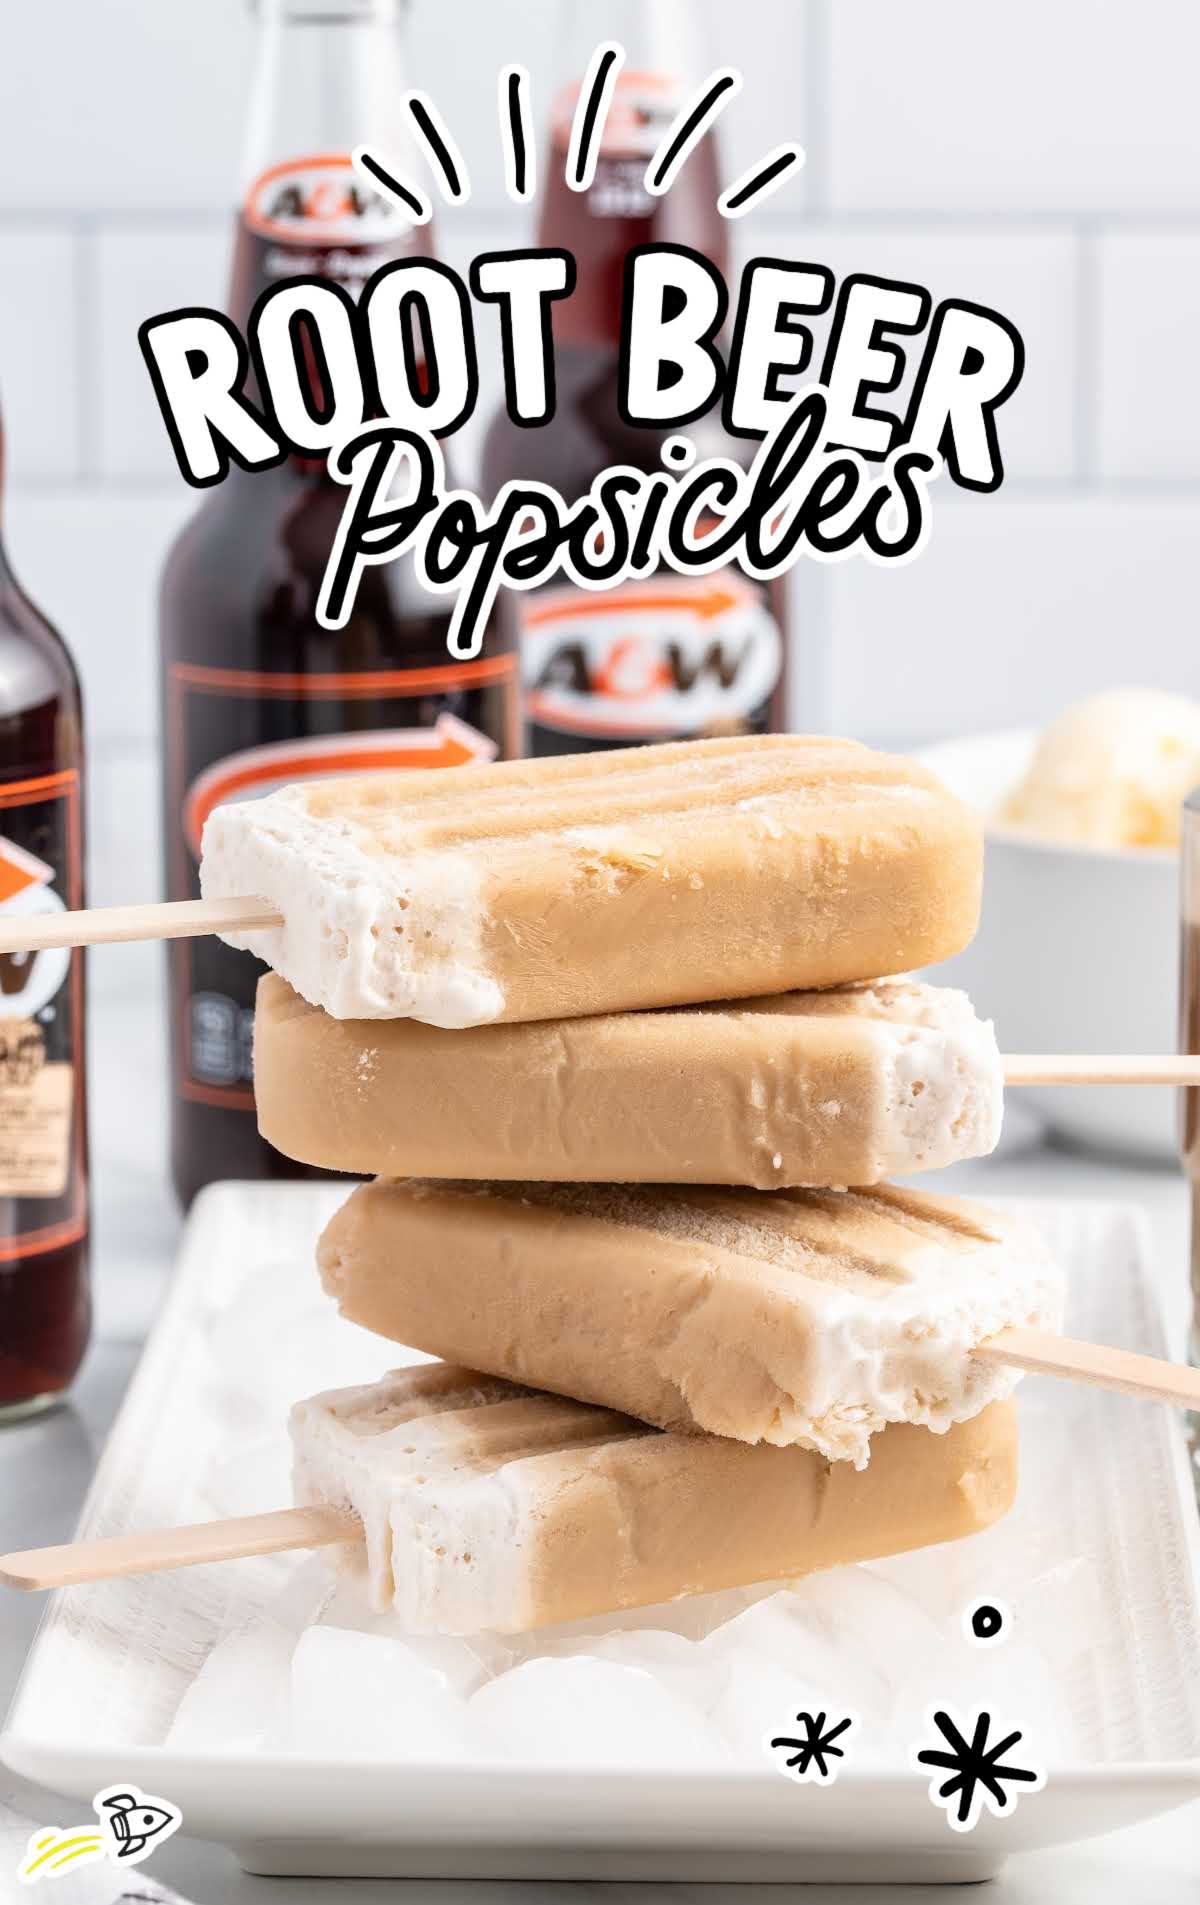 a close up shot of Root Beer Popsicles stacked on top of each other